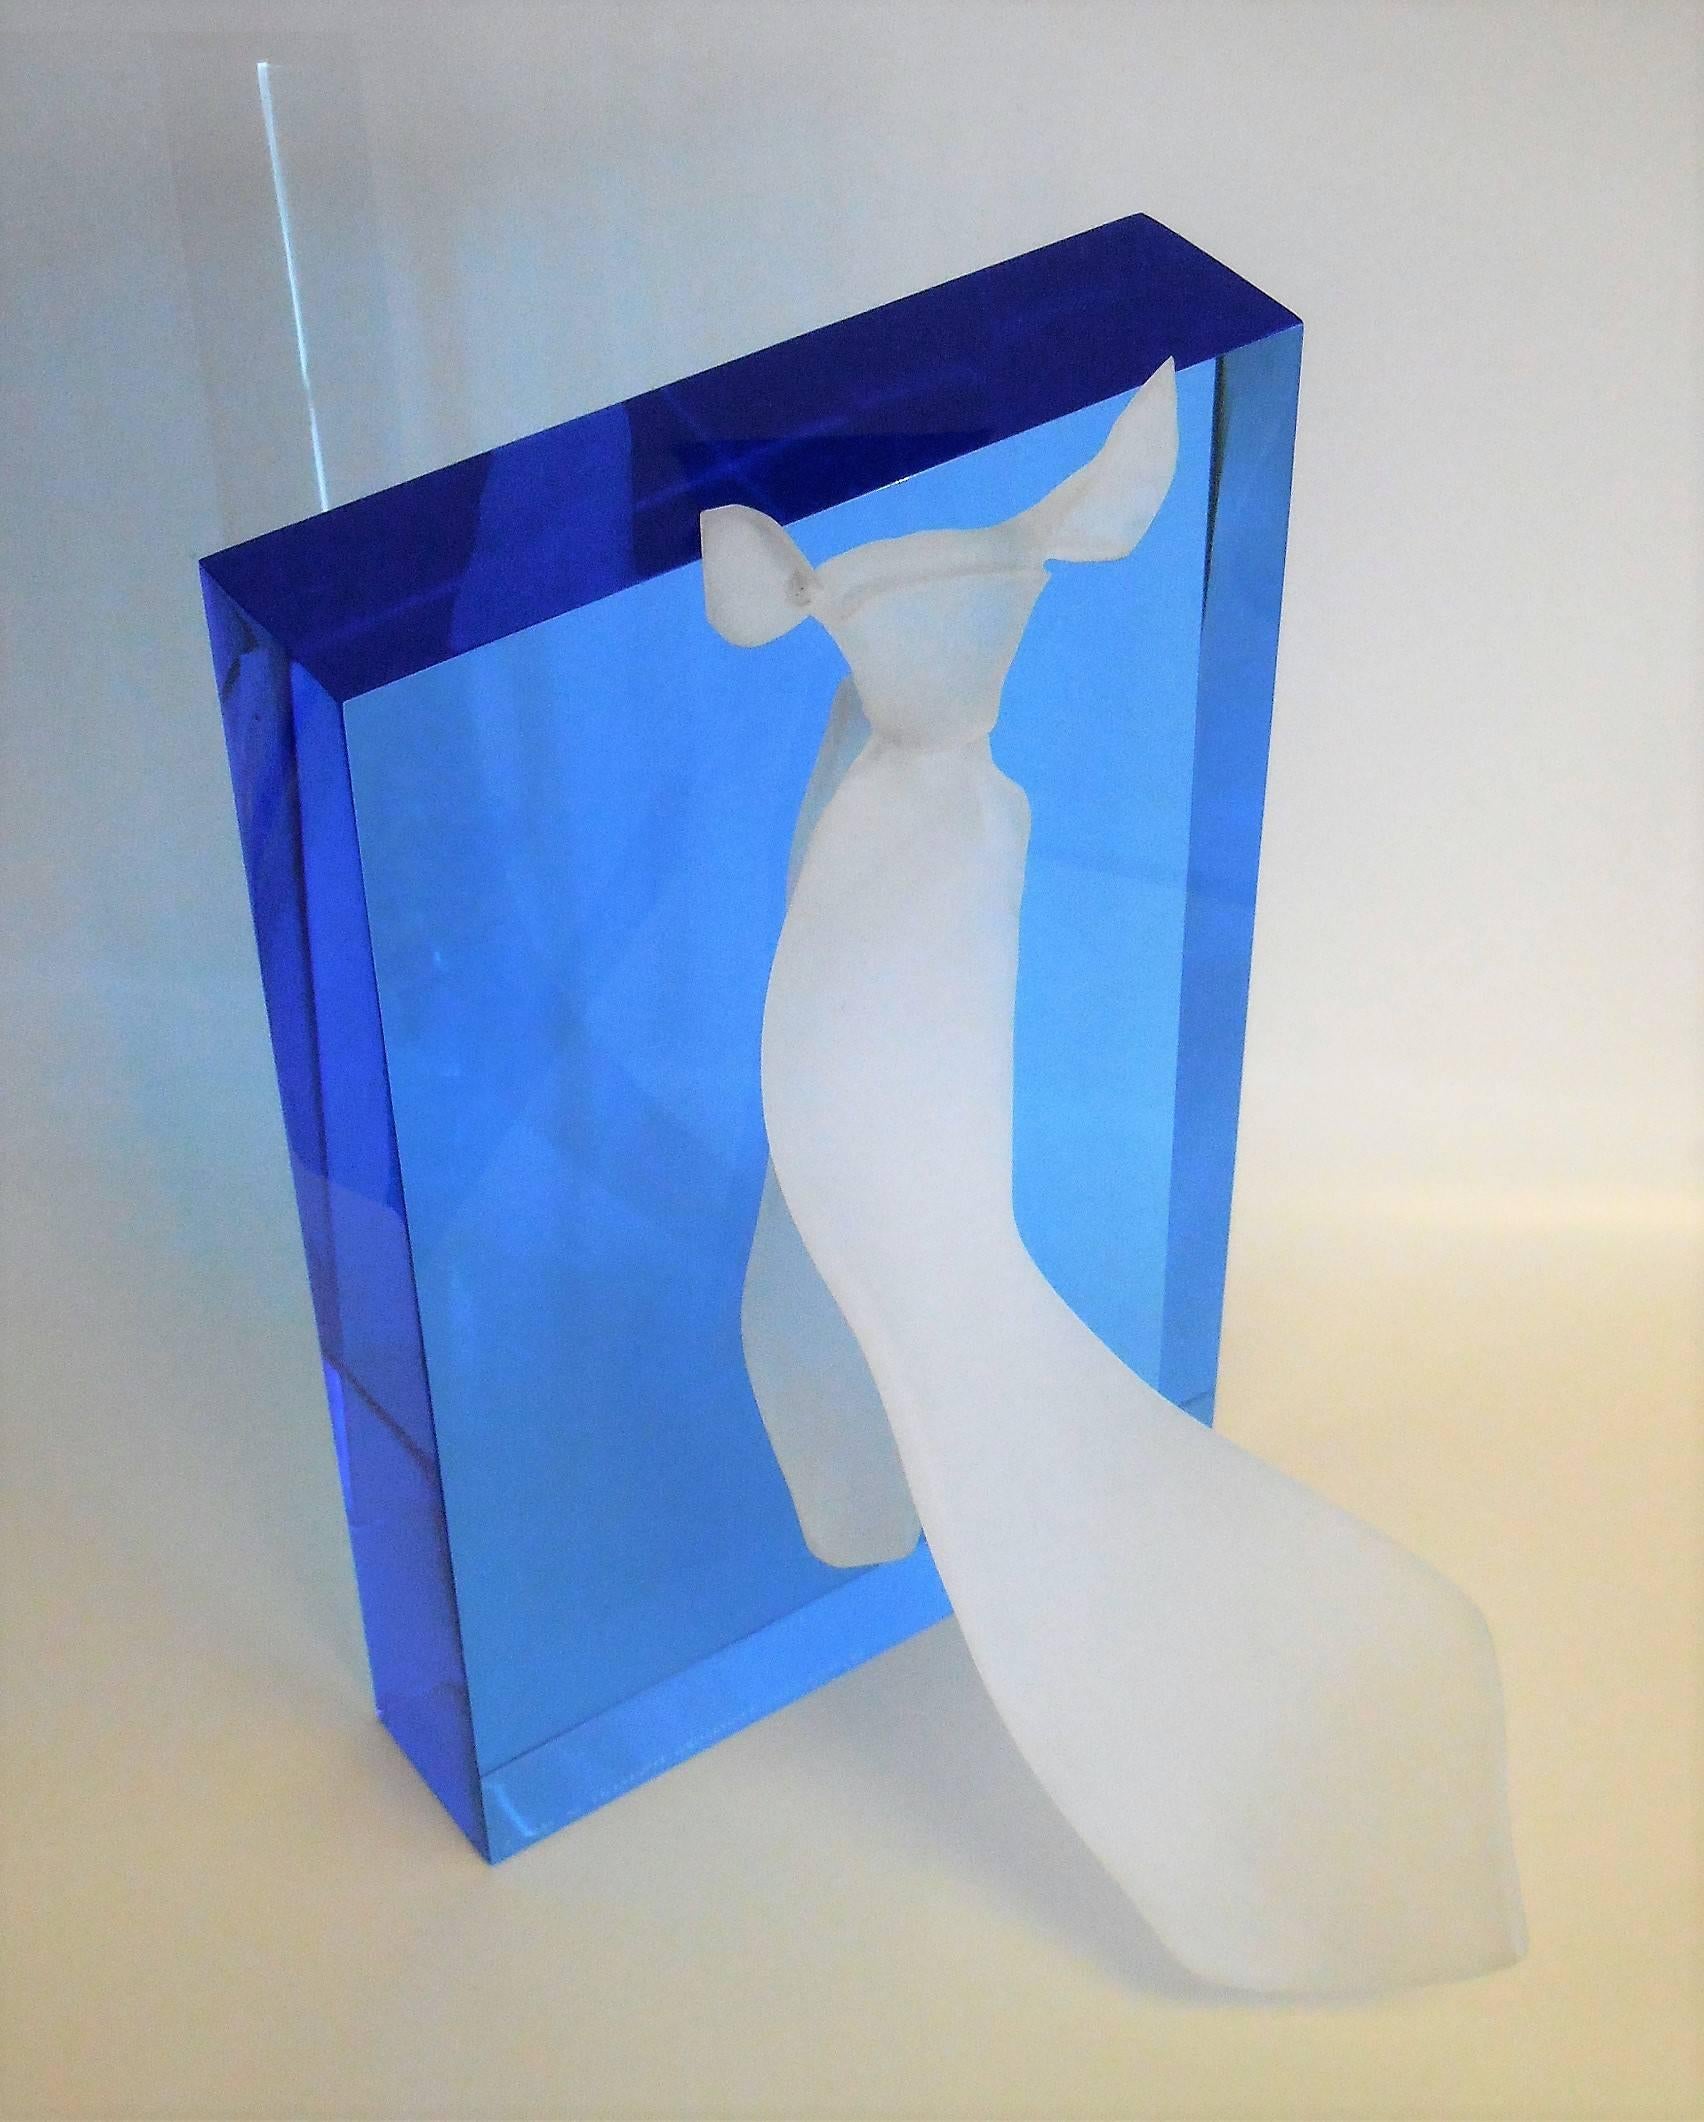 French Lucite Tie Sculpture by Claude Guyon, 1983